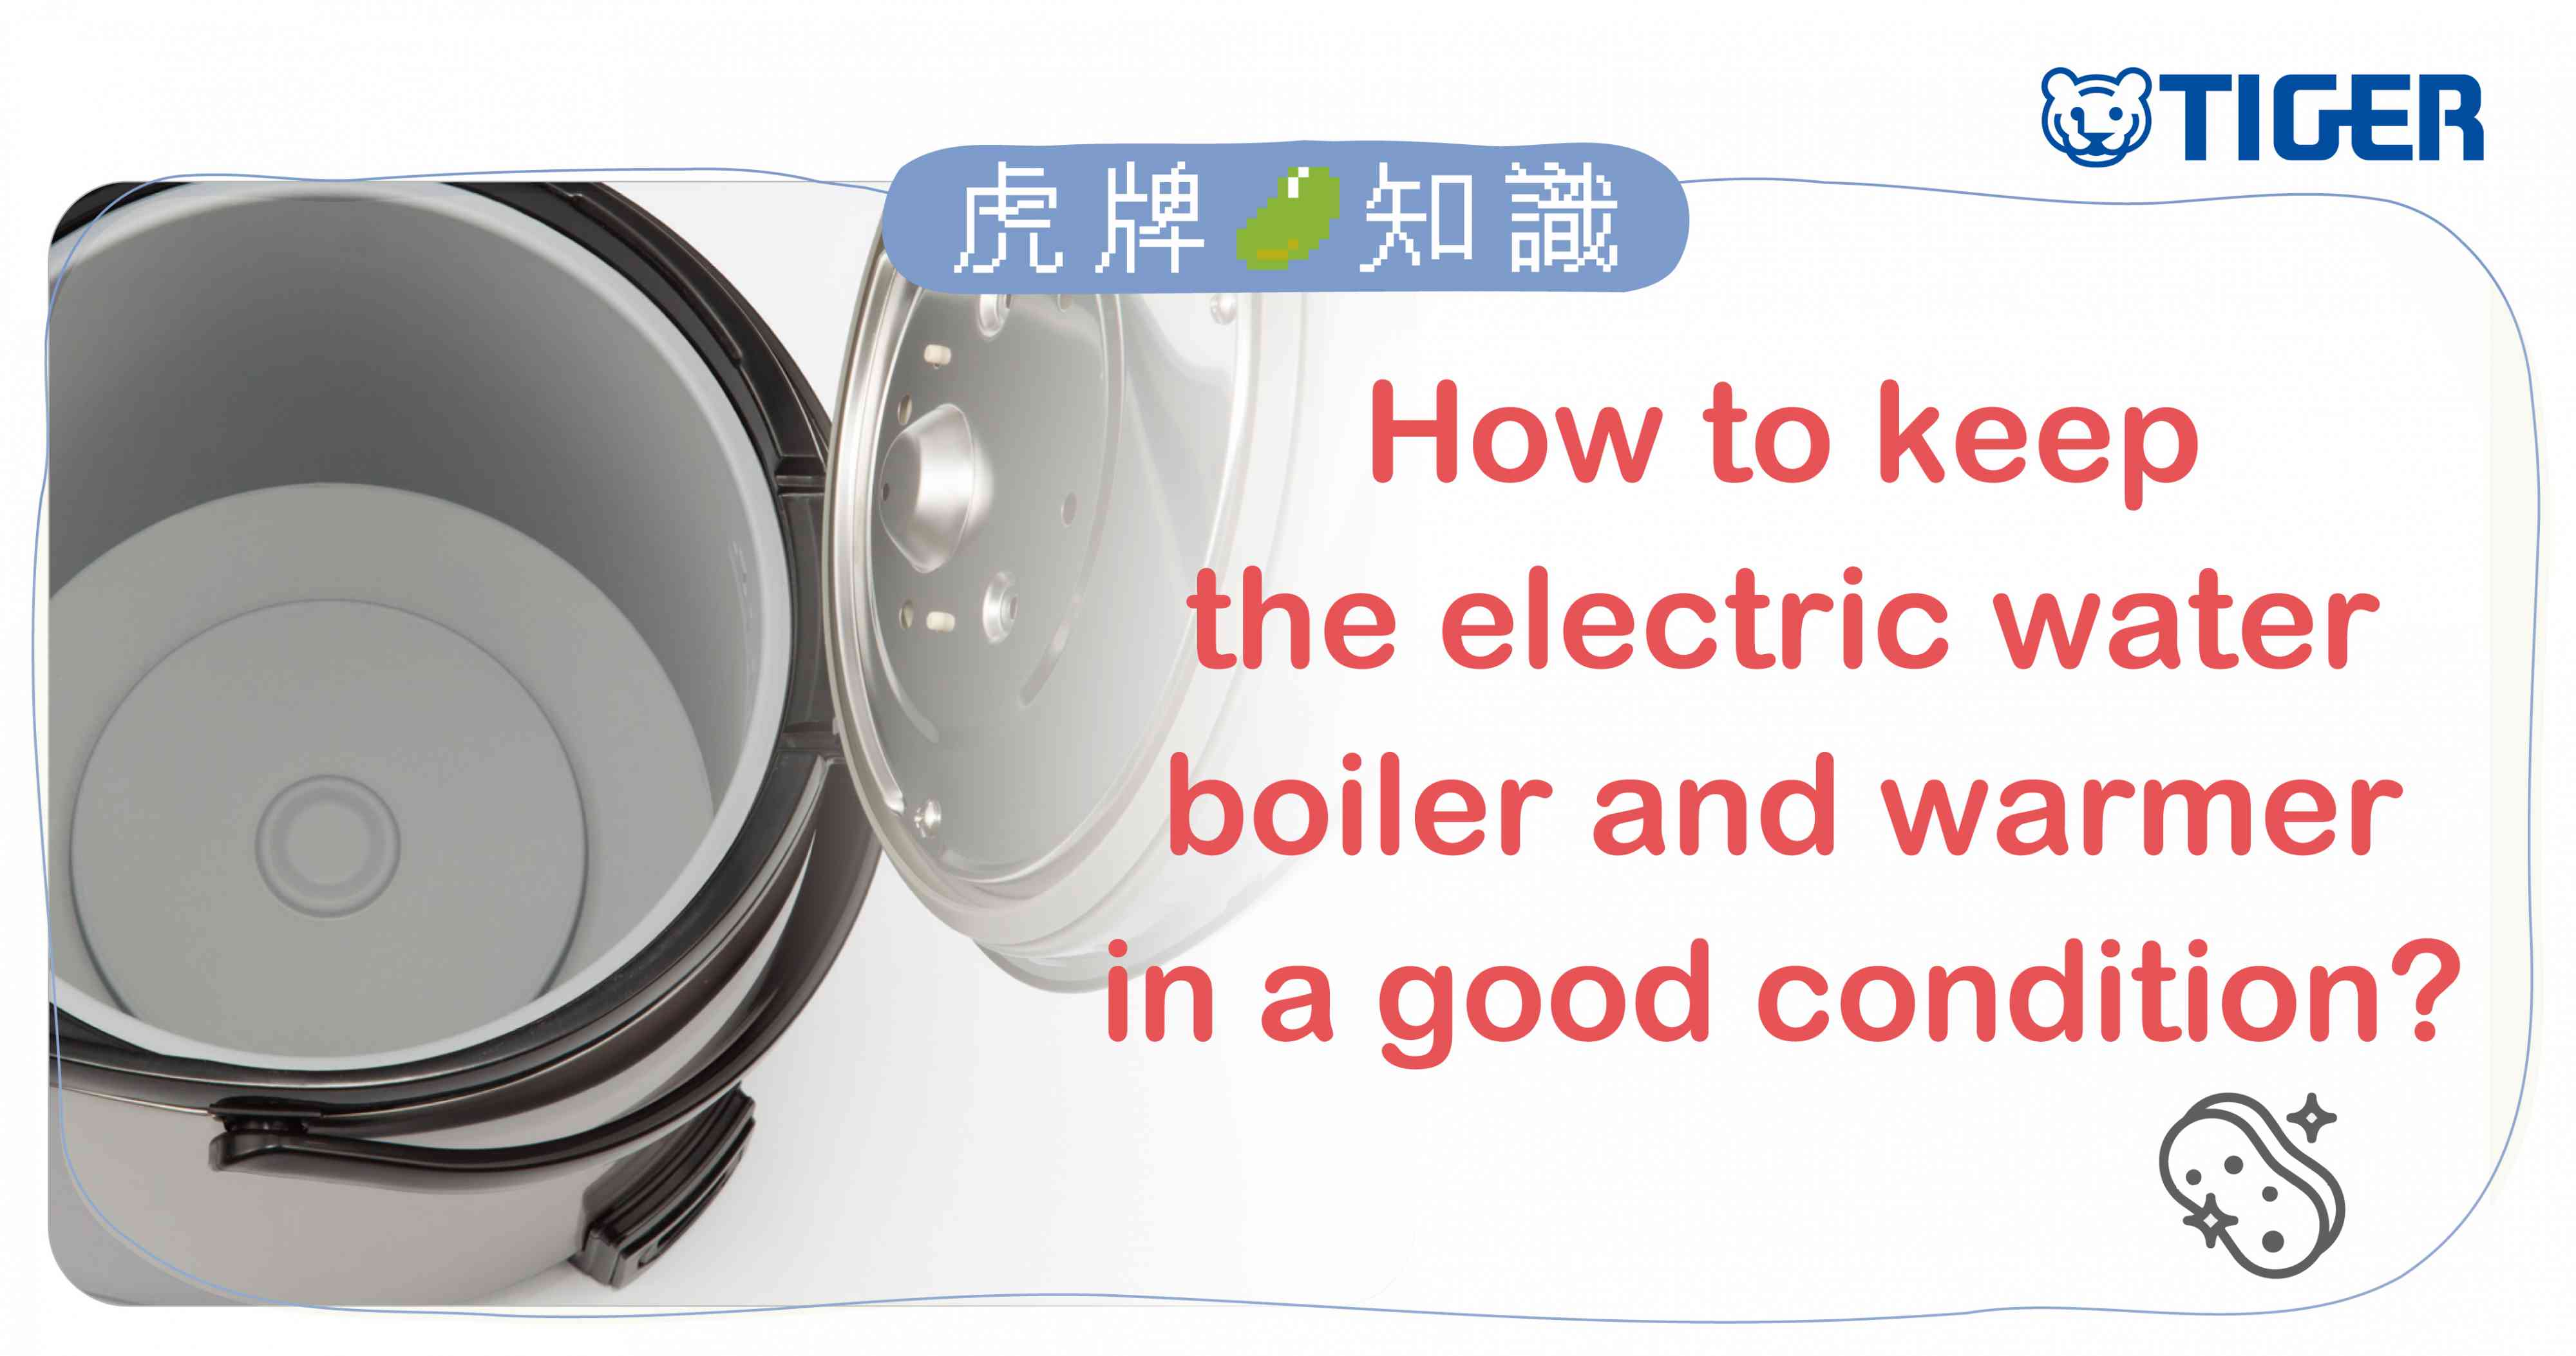 tiger-trivia-how-to-keep-the_-electric-water-boiler-and-warmer-en-2.jpg (256 KB)